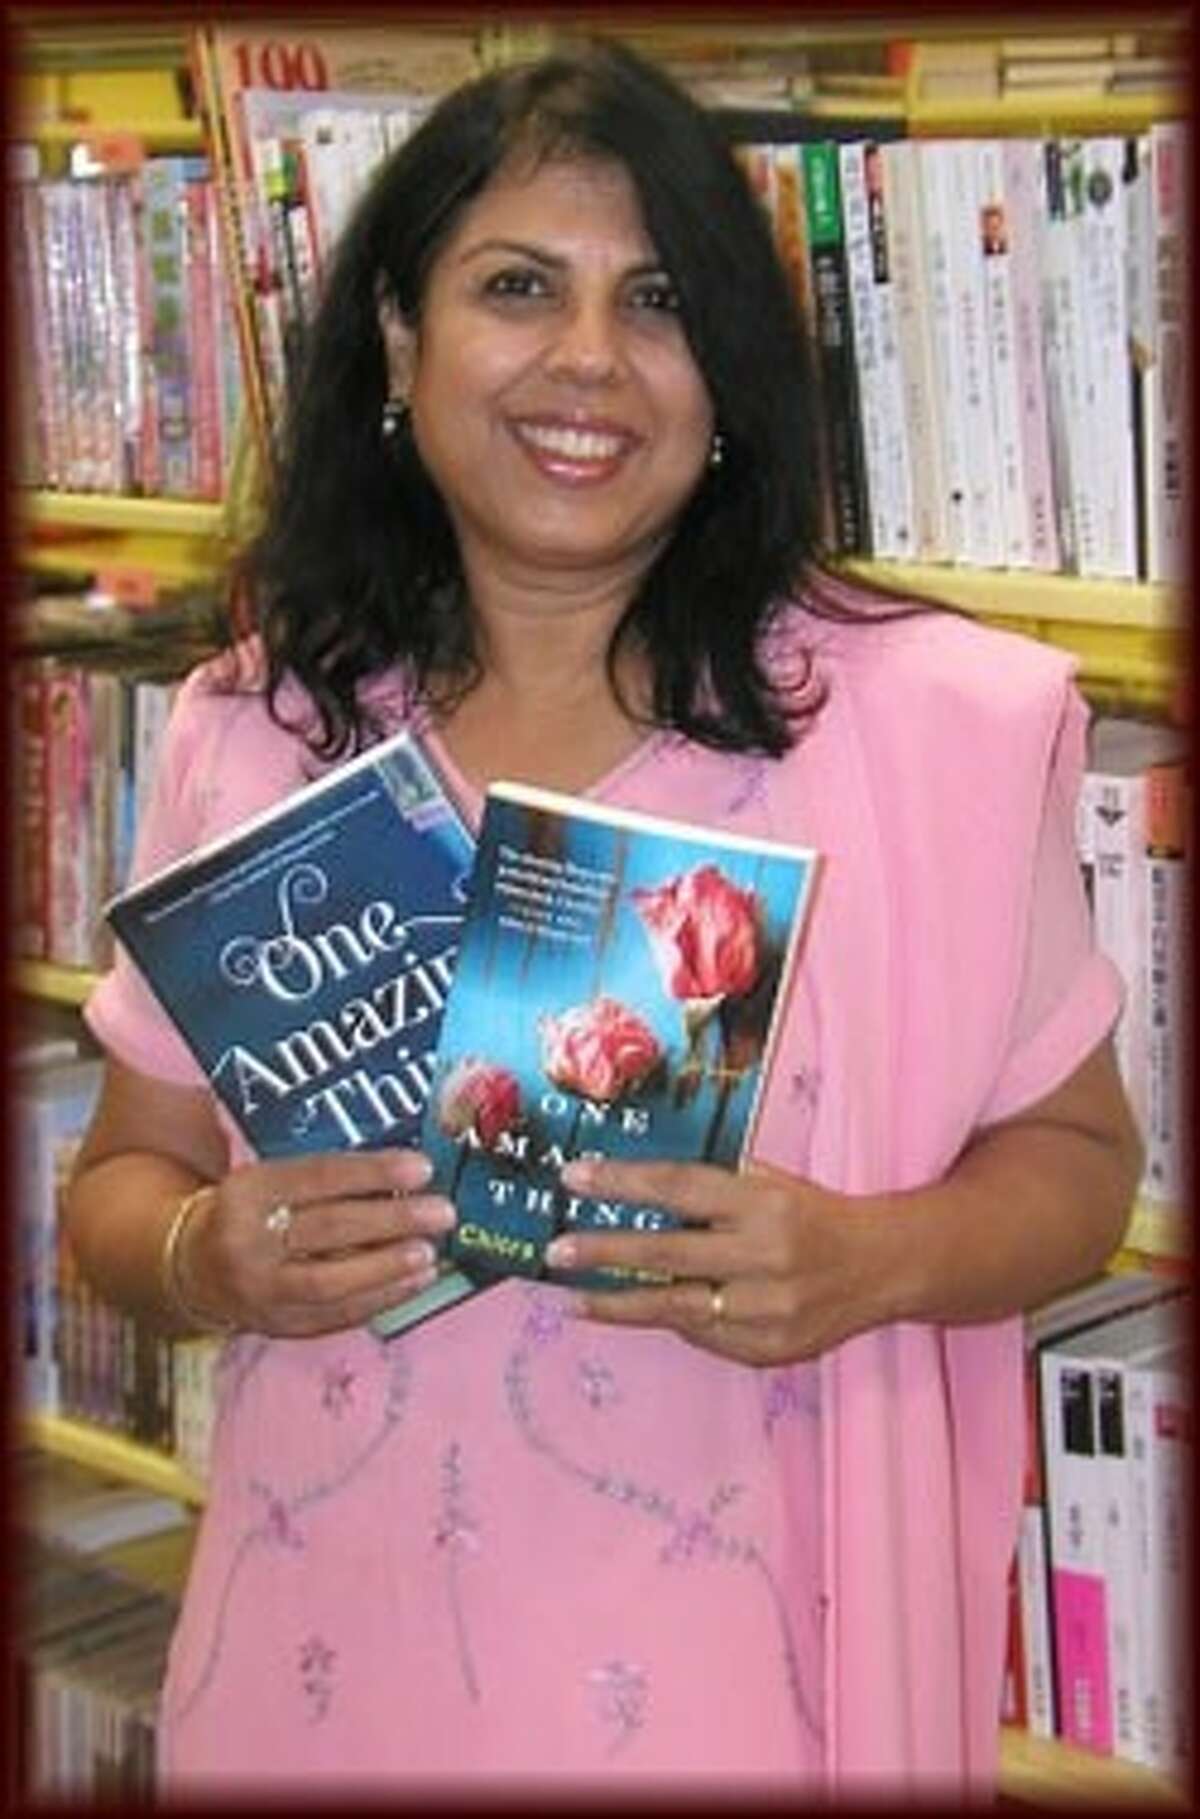 The entire Houston region will read Chitra Banerjee Divakaruni’s “One Amazing Thing” as part of Gulf Coast Read: On the Same Page, which takes place at libraries throughout September.